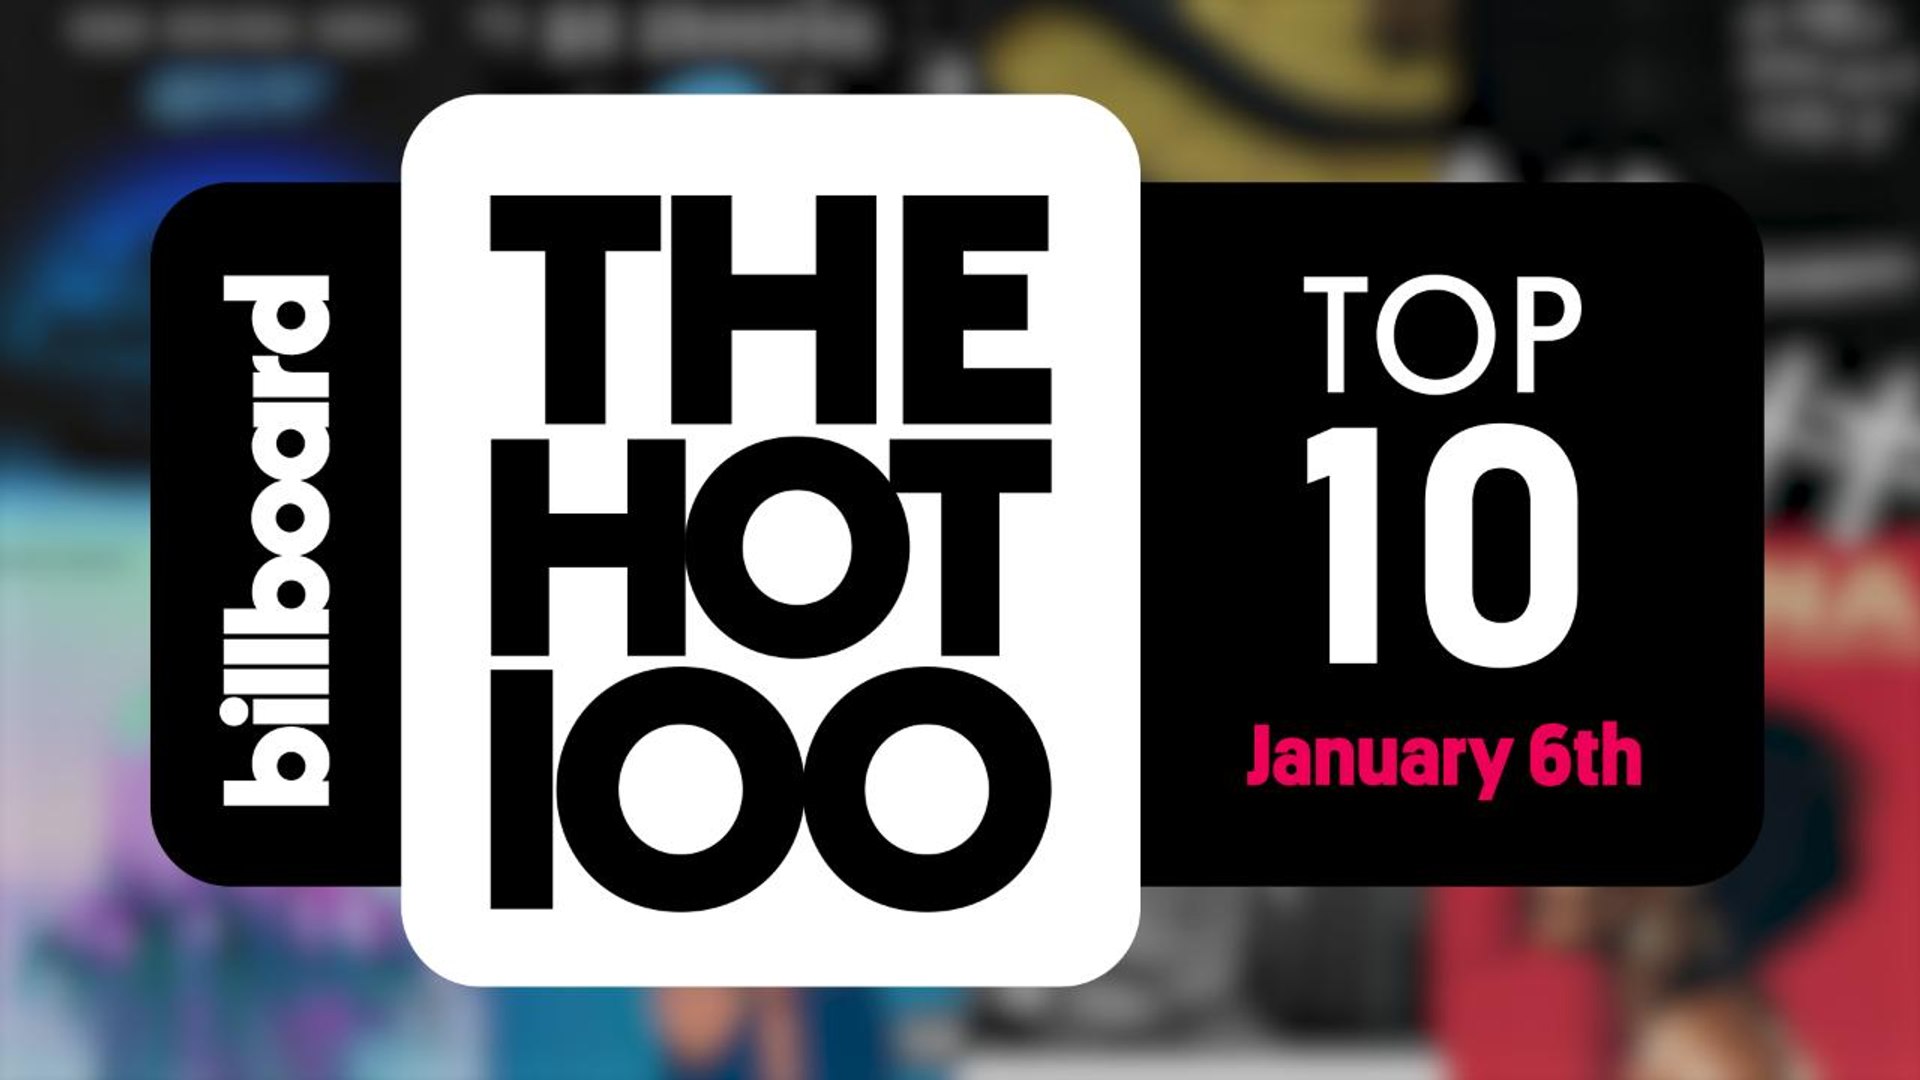 Early Release! Billboard Hot 100 Top 10 January 6th 2018 Countdown | Official